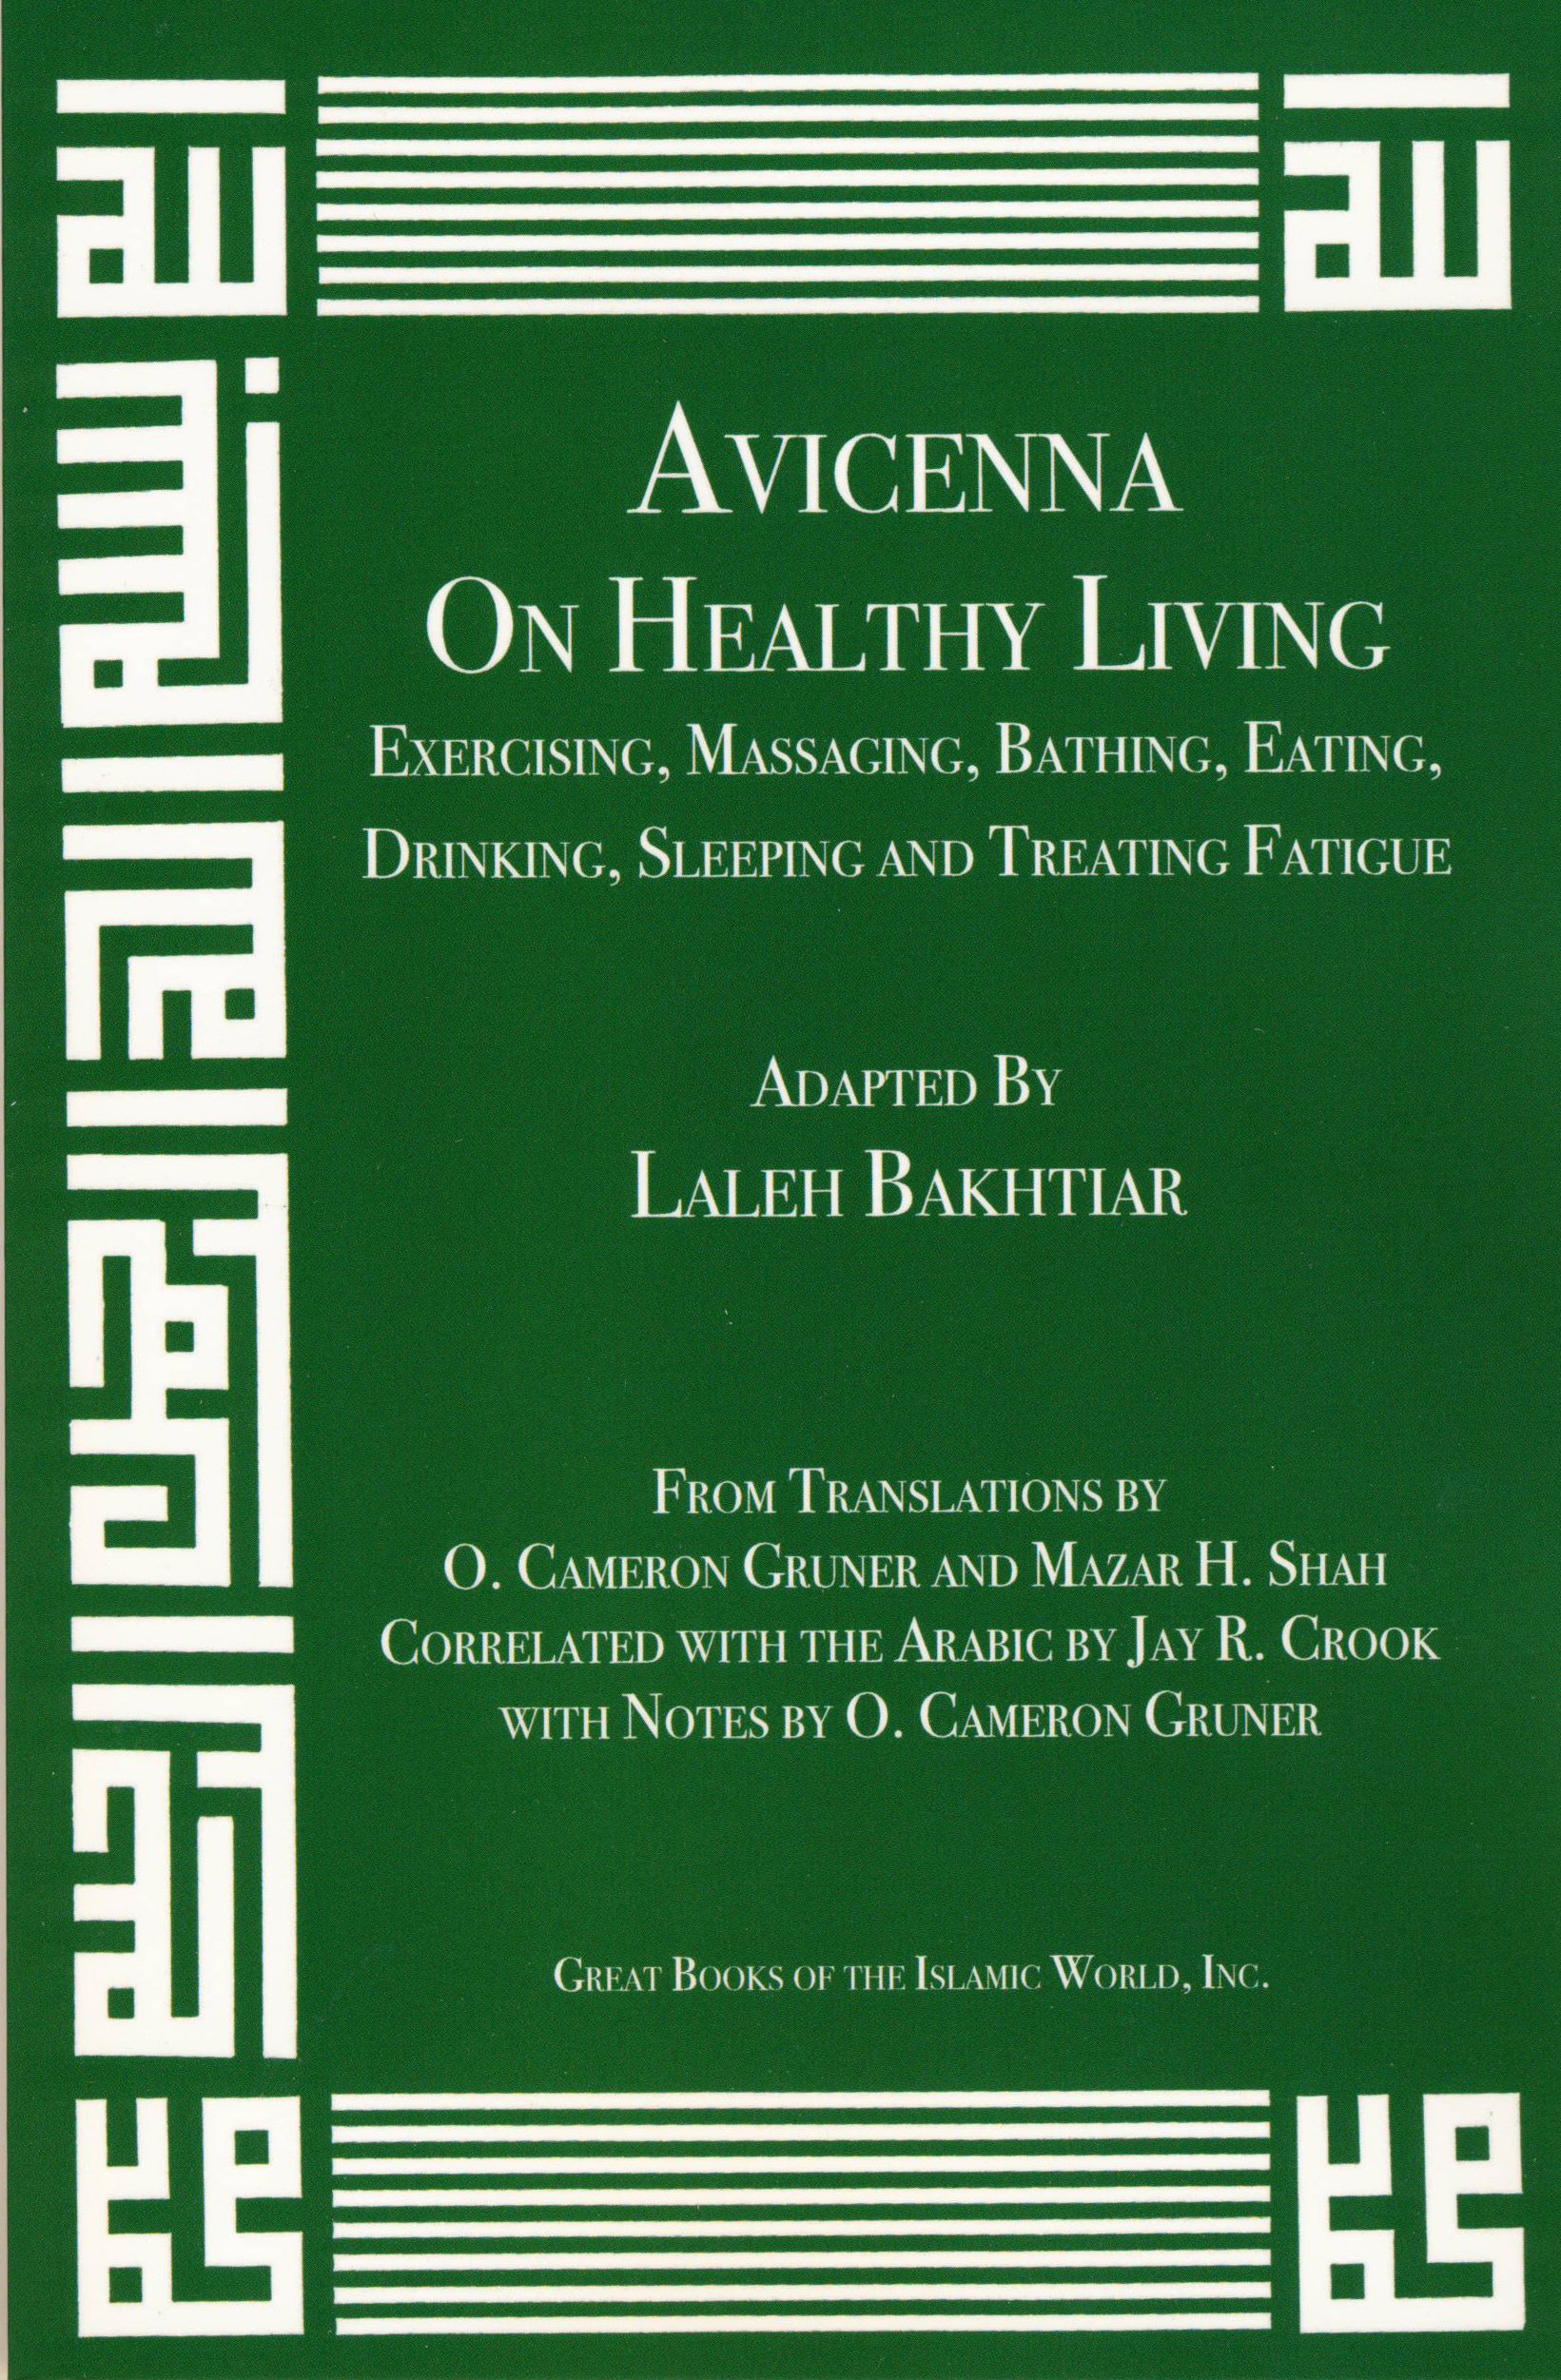 Book Cover Avicenna On Exercising, Massaging, Bathing, Eating, Drinking, Sleeping and Treating Fatigue from the Canon of Medicine Volume 1